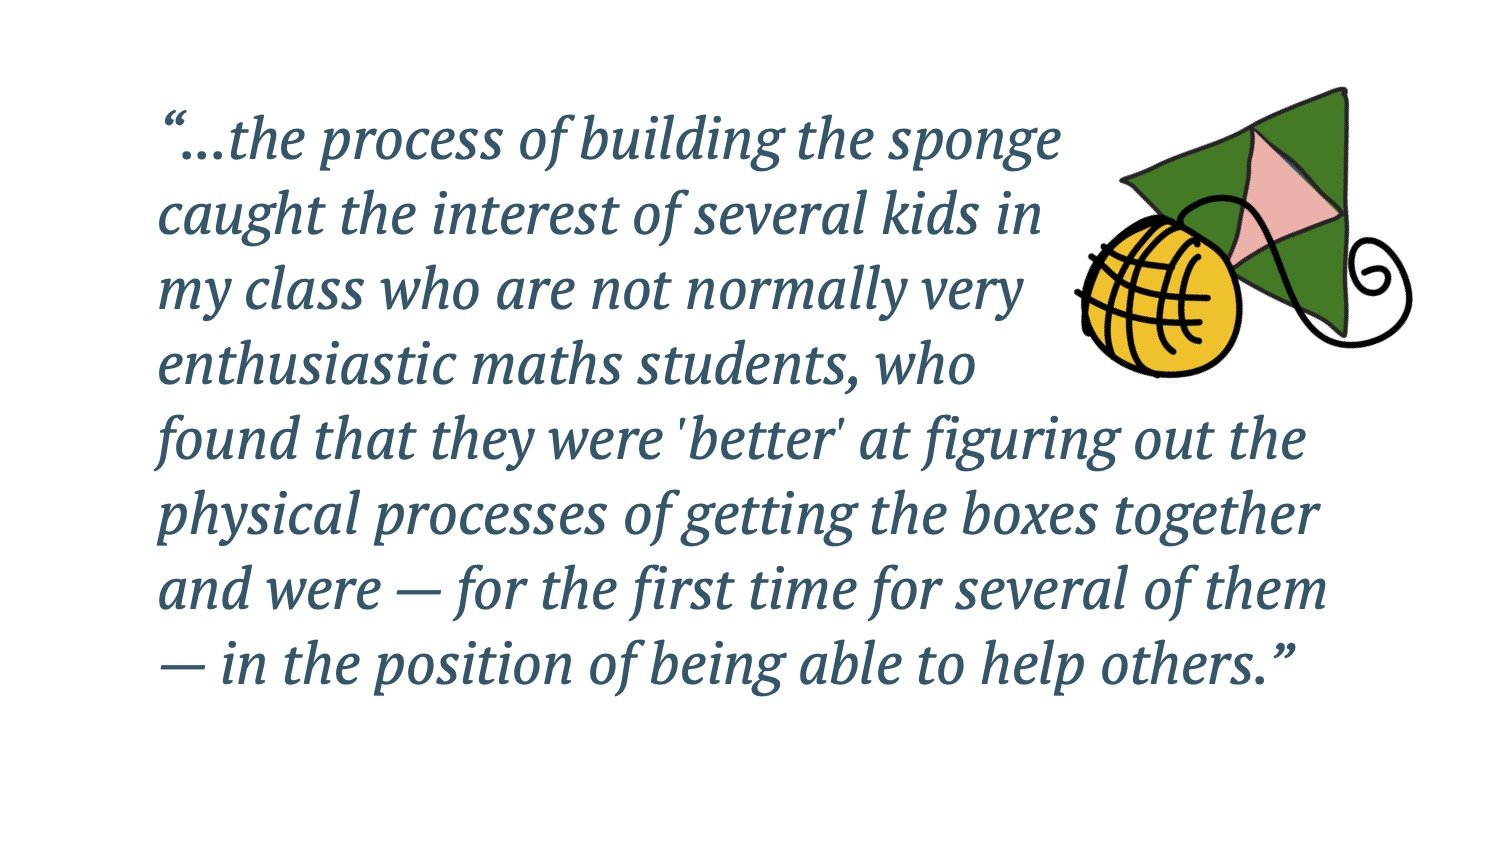 Quote: ....the process of building the sponge caught the interest of several kids in my class who are not normally very enthusiastic maths students...